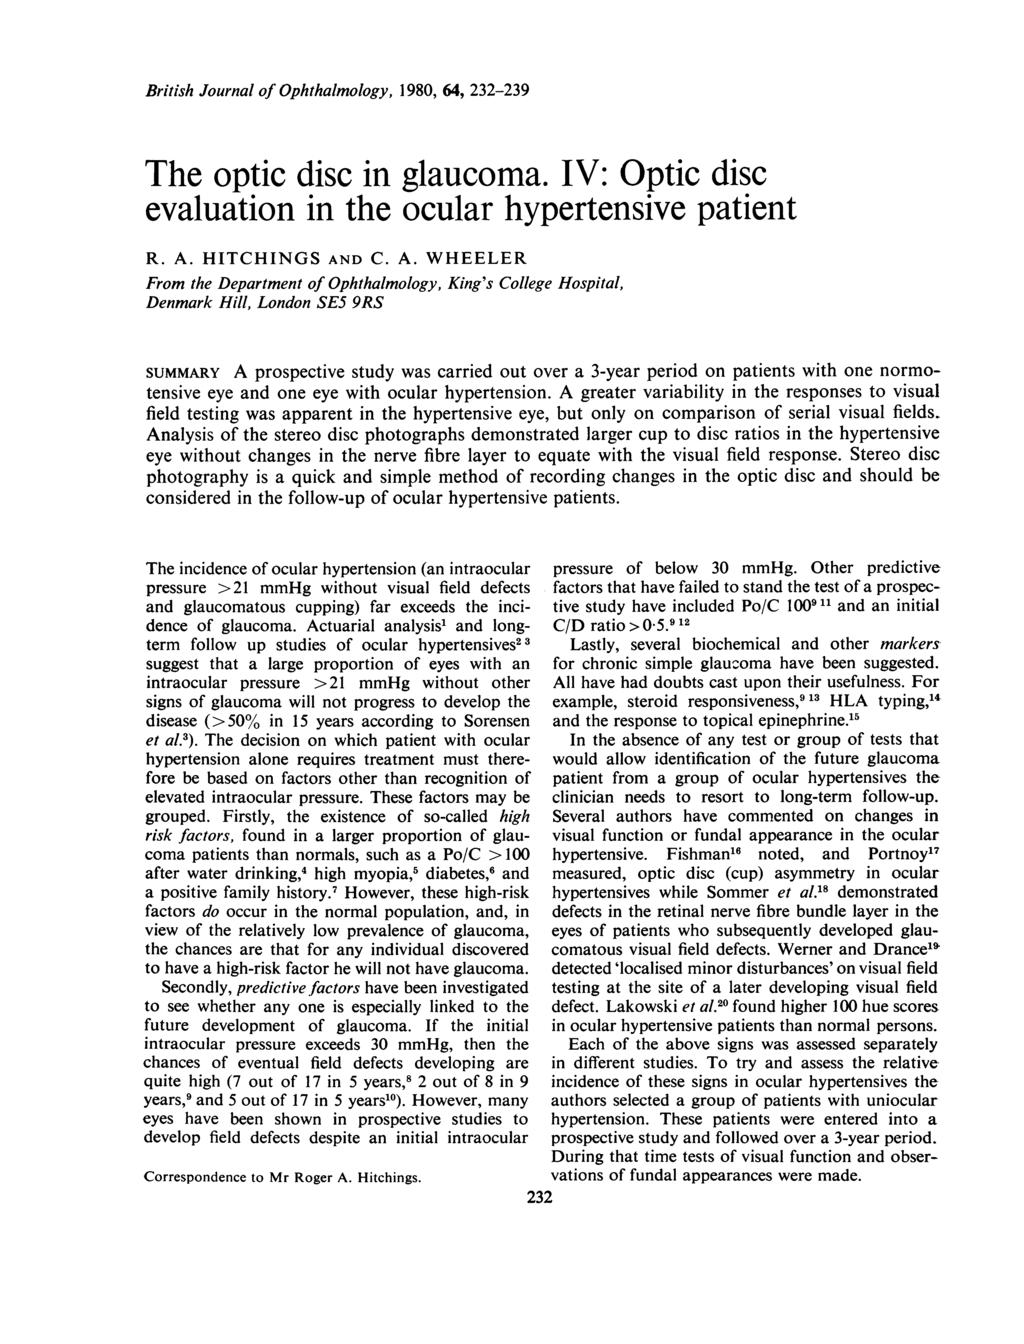 British Journal of Ophthalmology, 1980, 64, 232-239 The optic disc in glaucoma. IV: Optic disc evaluation in the ocular hypertensive patient R. A.